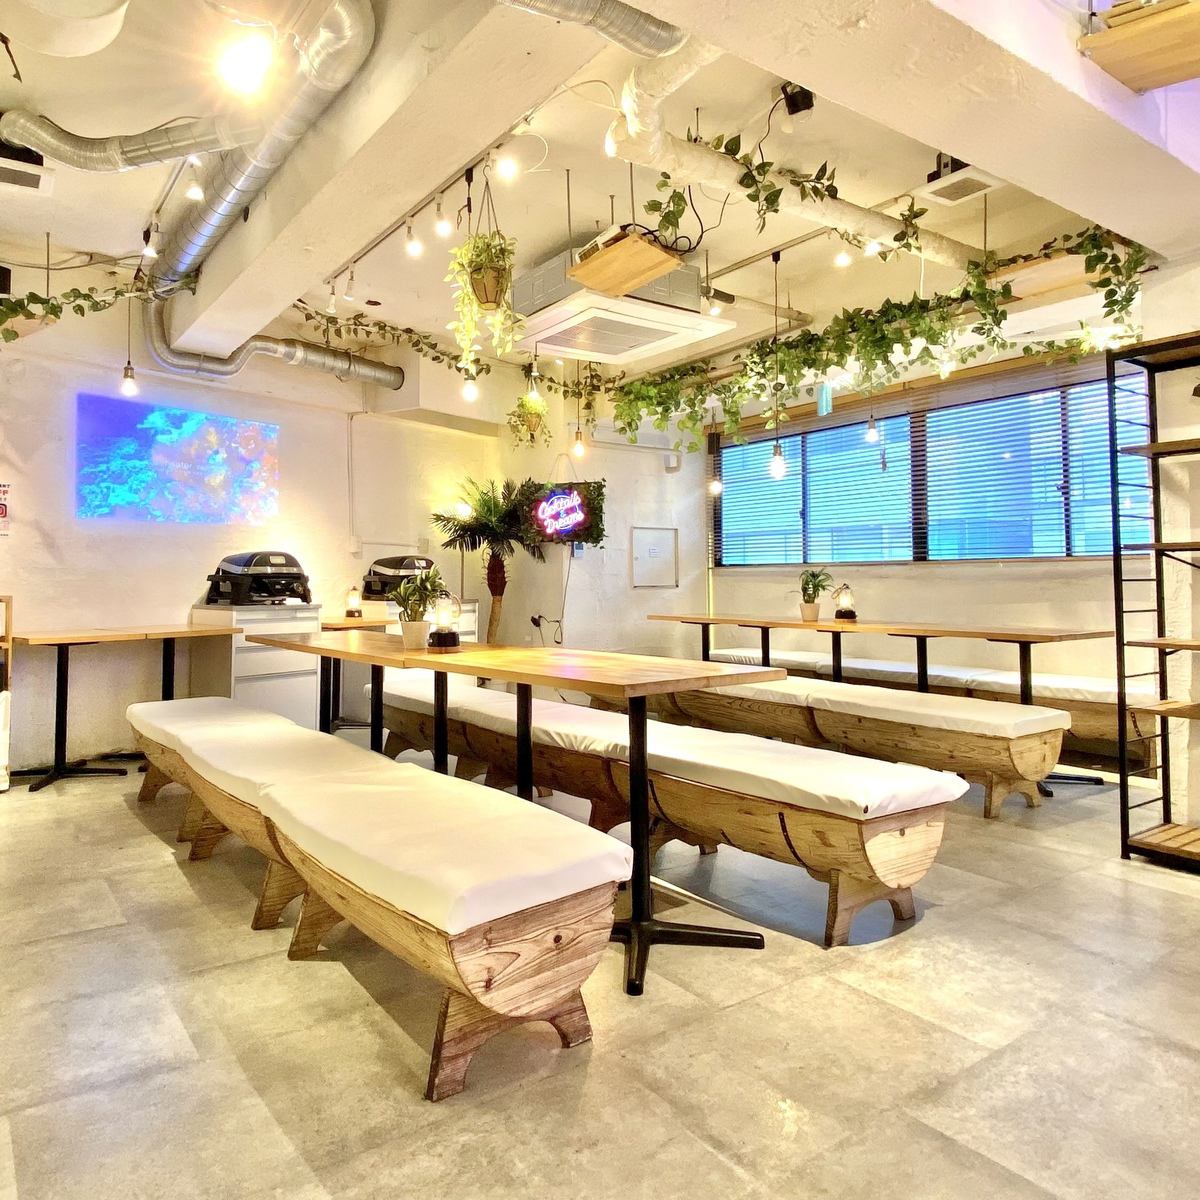 A 2-minute walk from Shibuya Station, this stylish private izakaya is ideal for groups of 20 to 40 people.